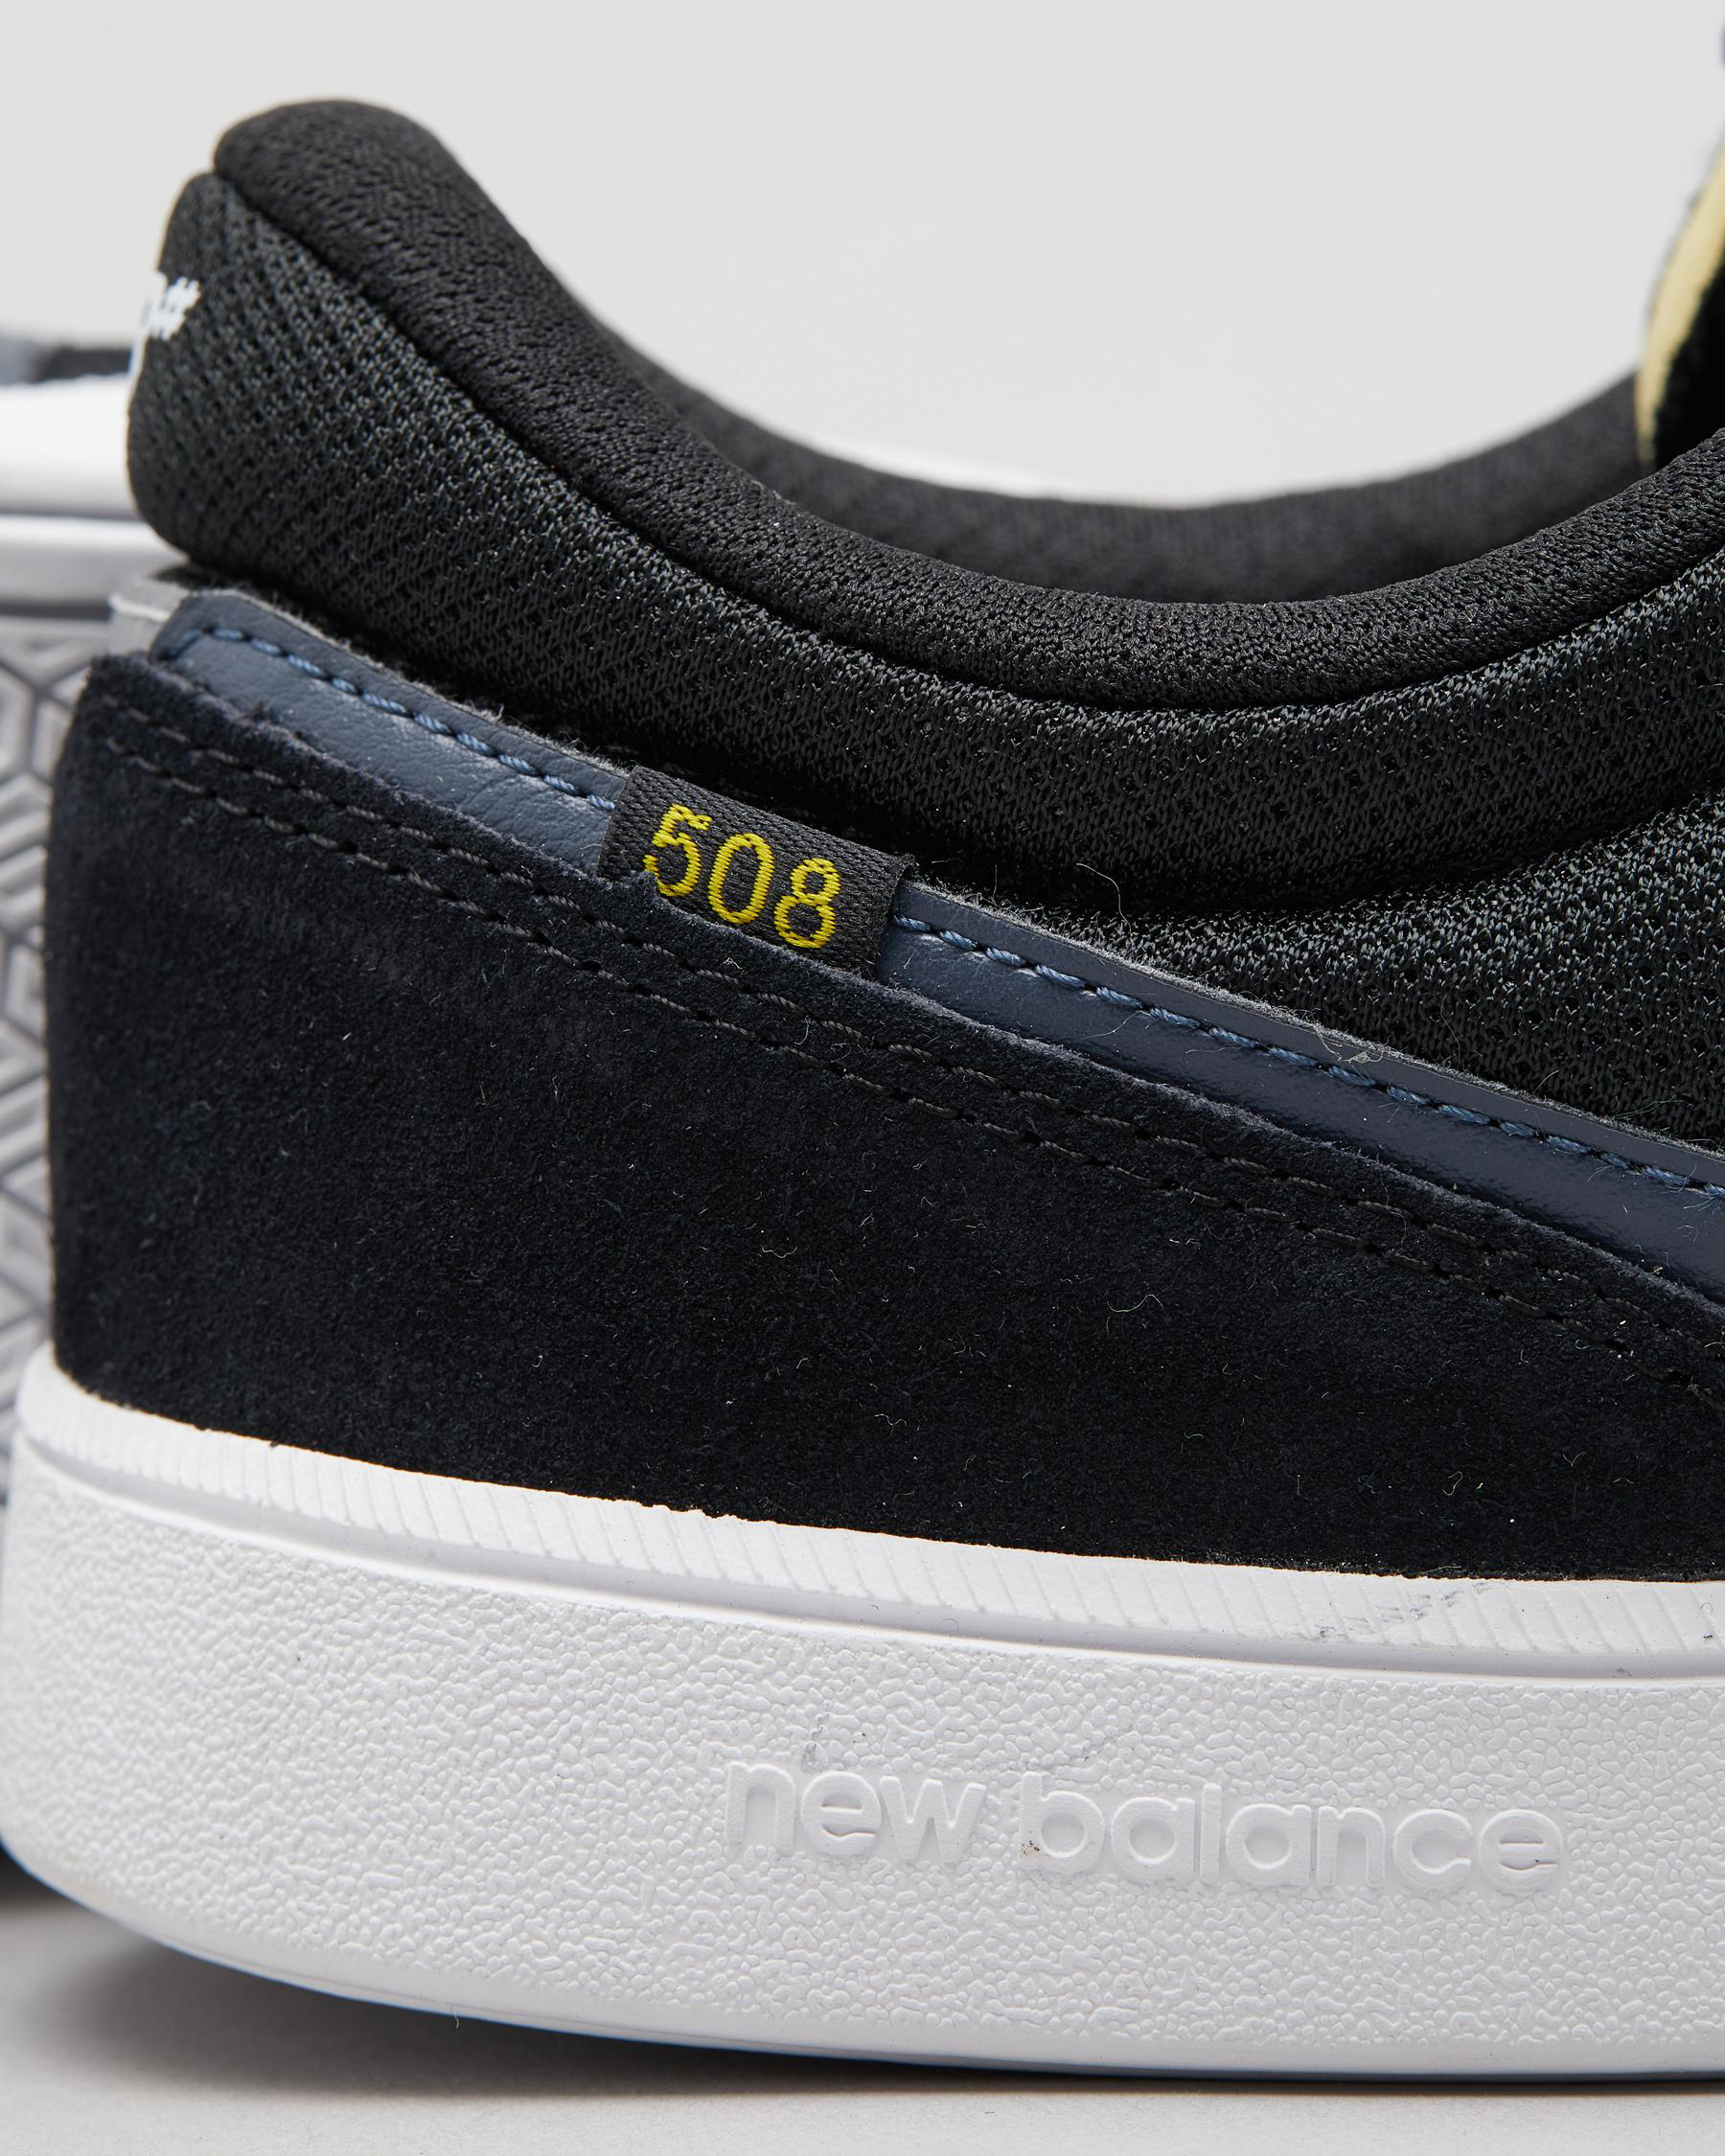 New Balance NB 508 Shoes In Black/navy - Fast Shipping & Easy Returns ...